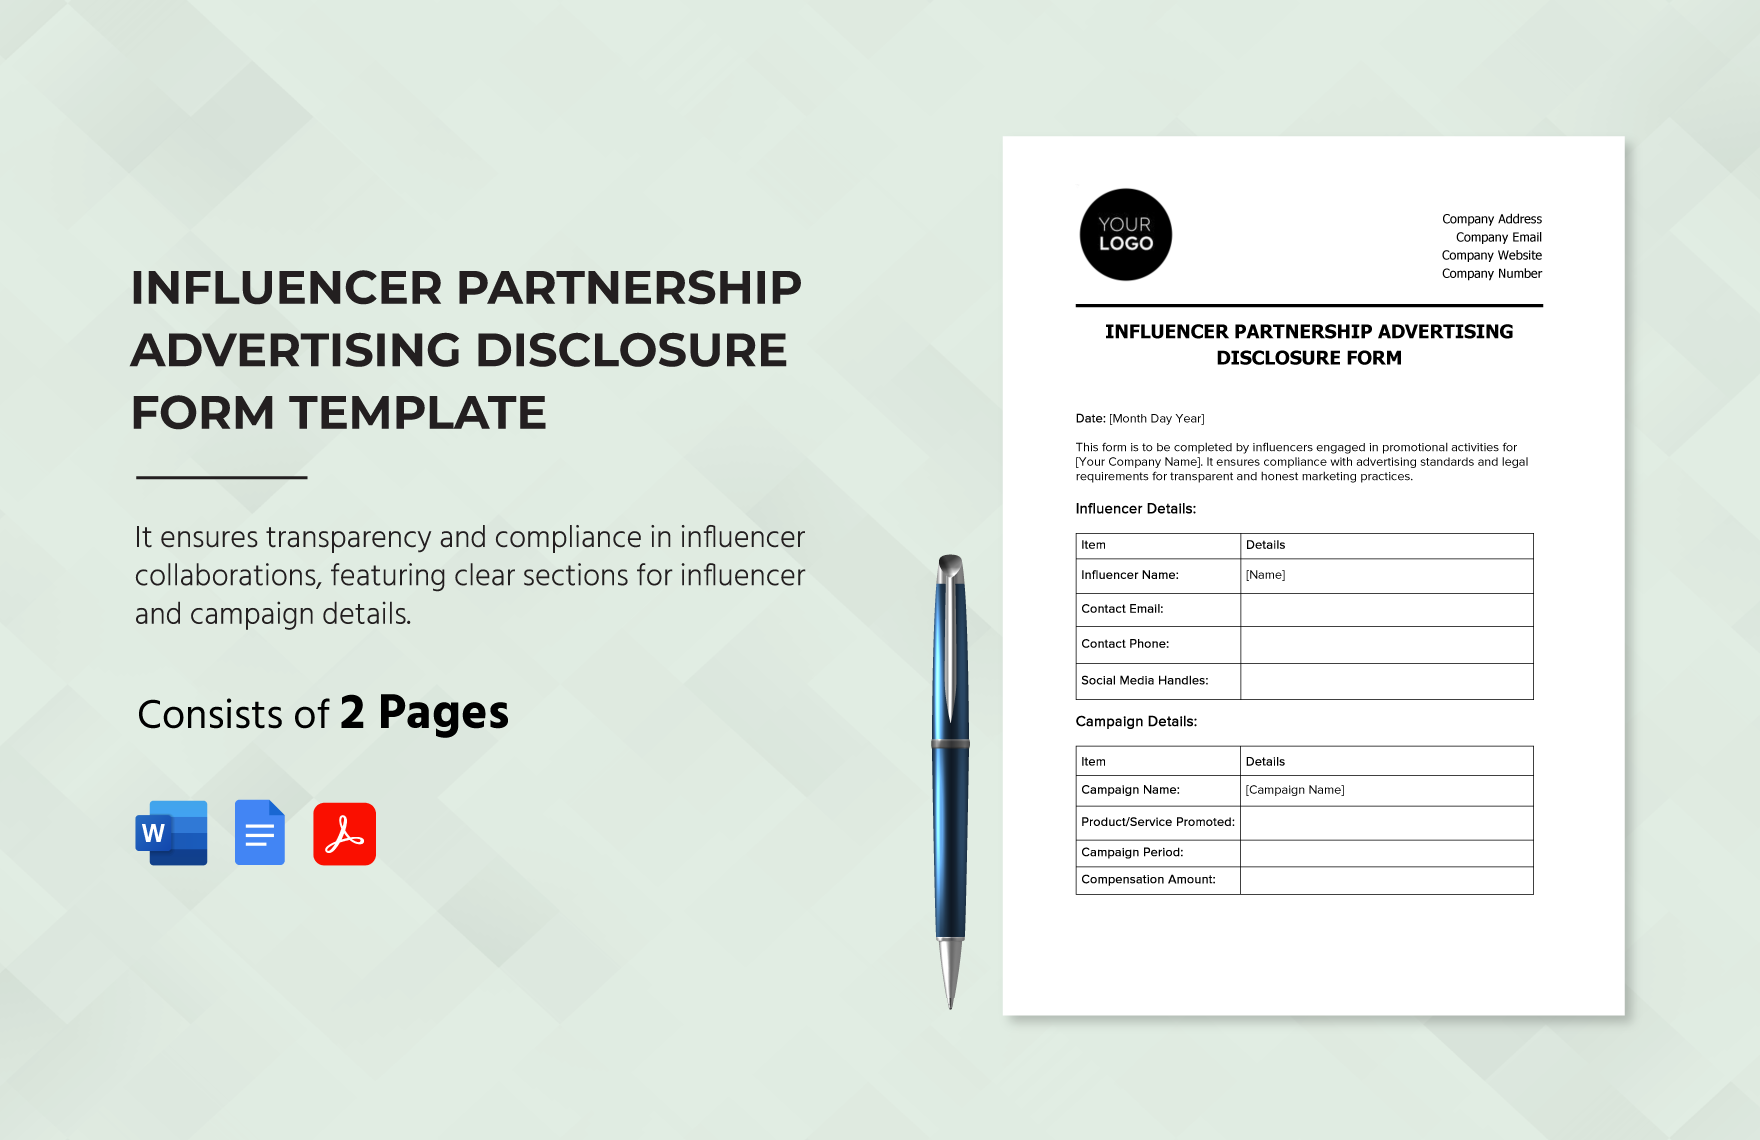 Influencer Partnership Advertising Disclosure Form Template in Word, Google Docs, PDF